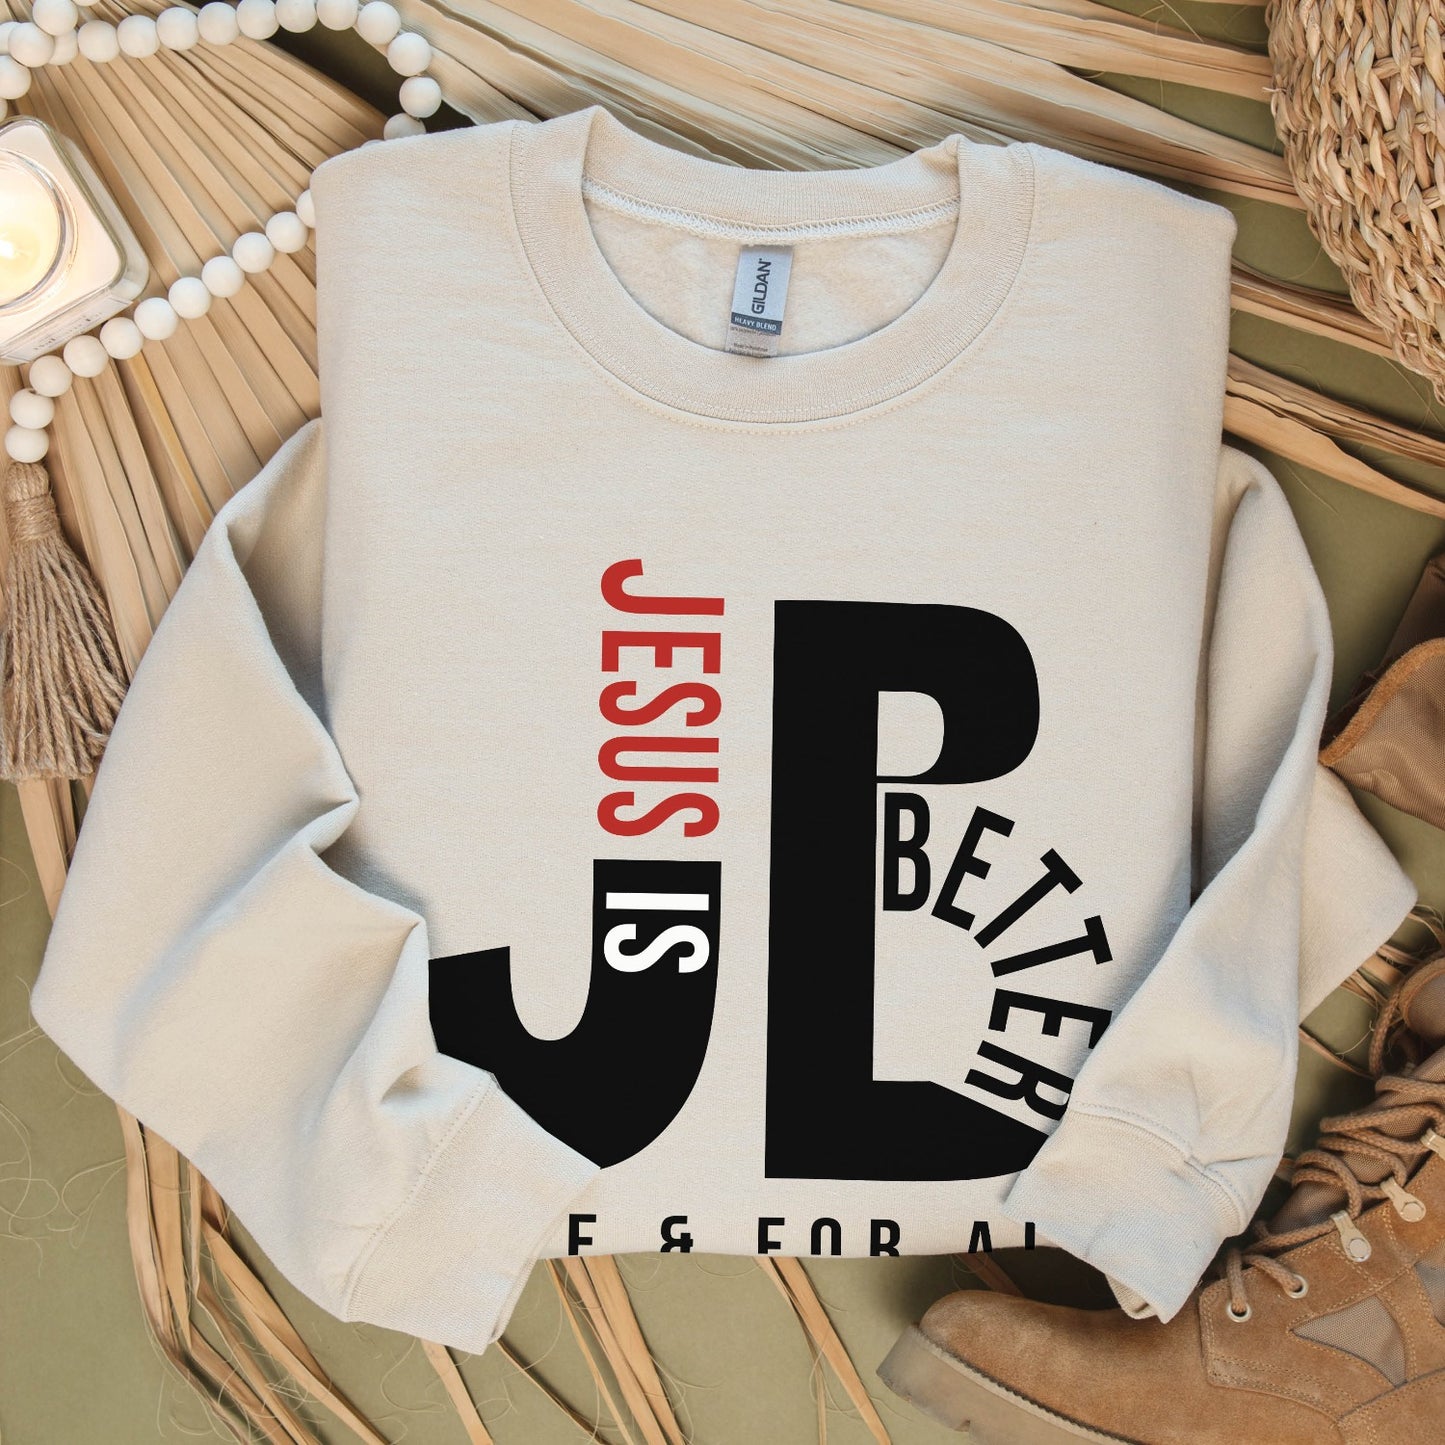 Cozy "JB" typography "Jesus is Better Once and For All" design in black and red letters, based on the Christian bible book of Hebrews, printed on a sand ivory color Unisex crewneck sweatshirt, created for faith-based men and women